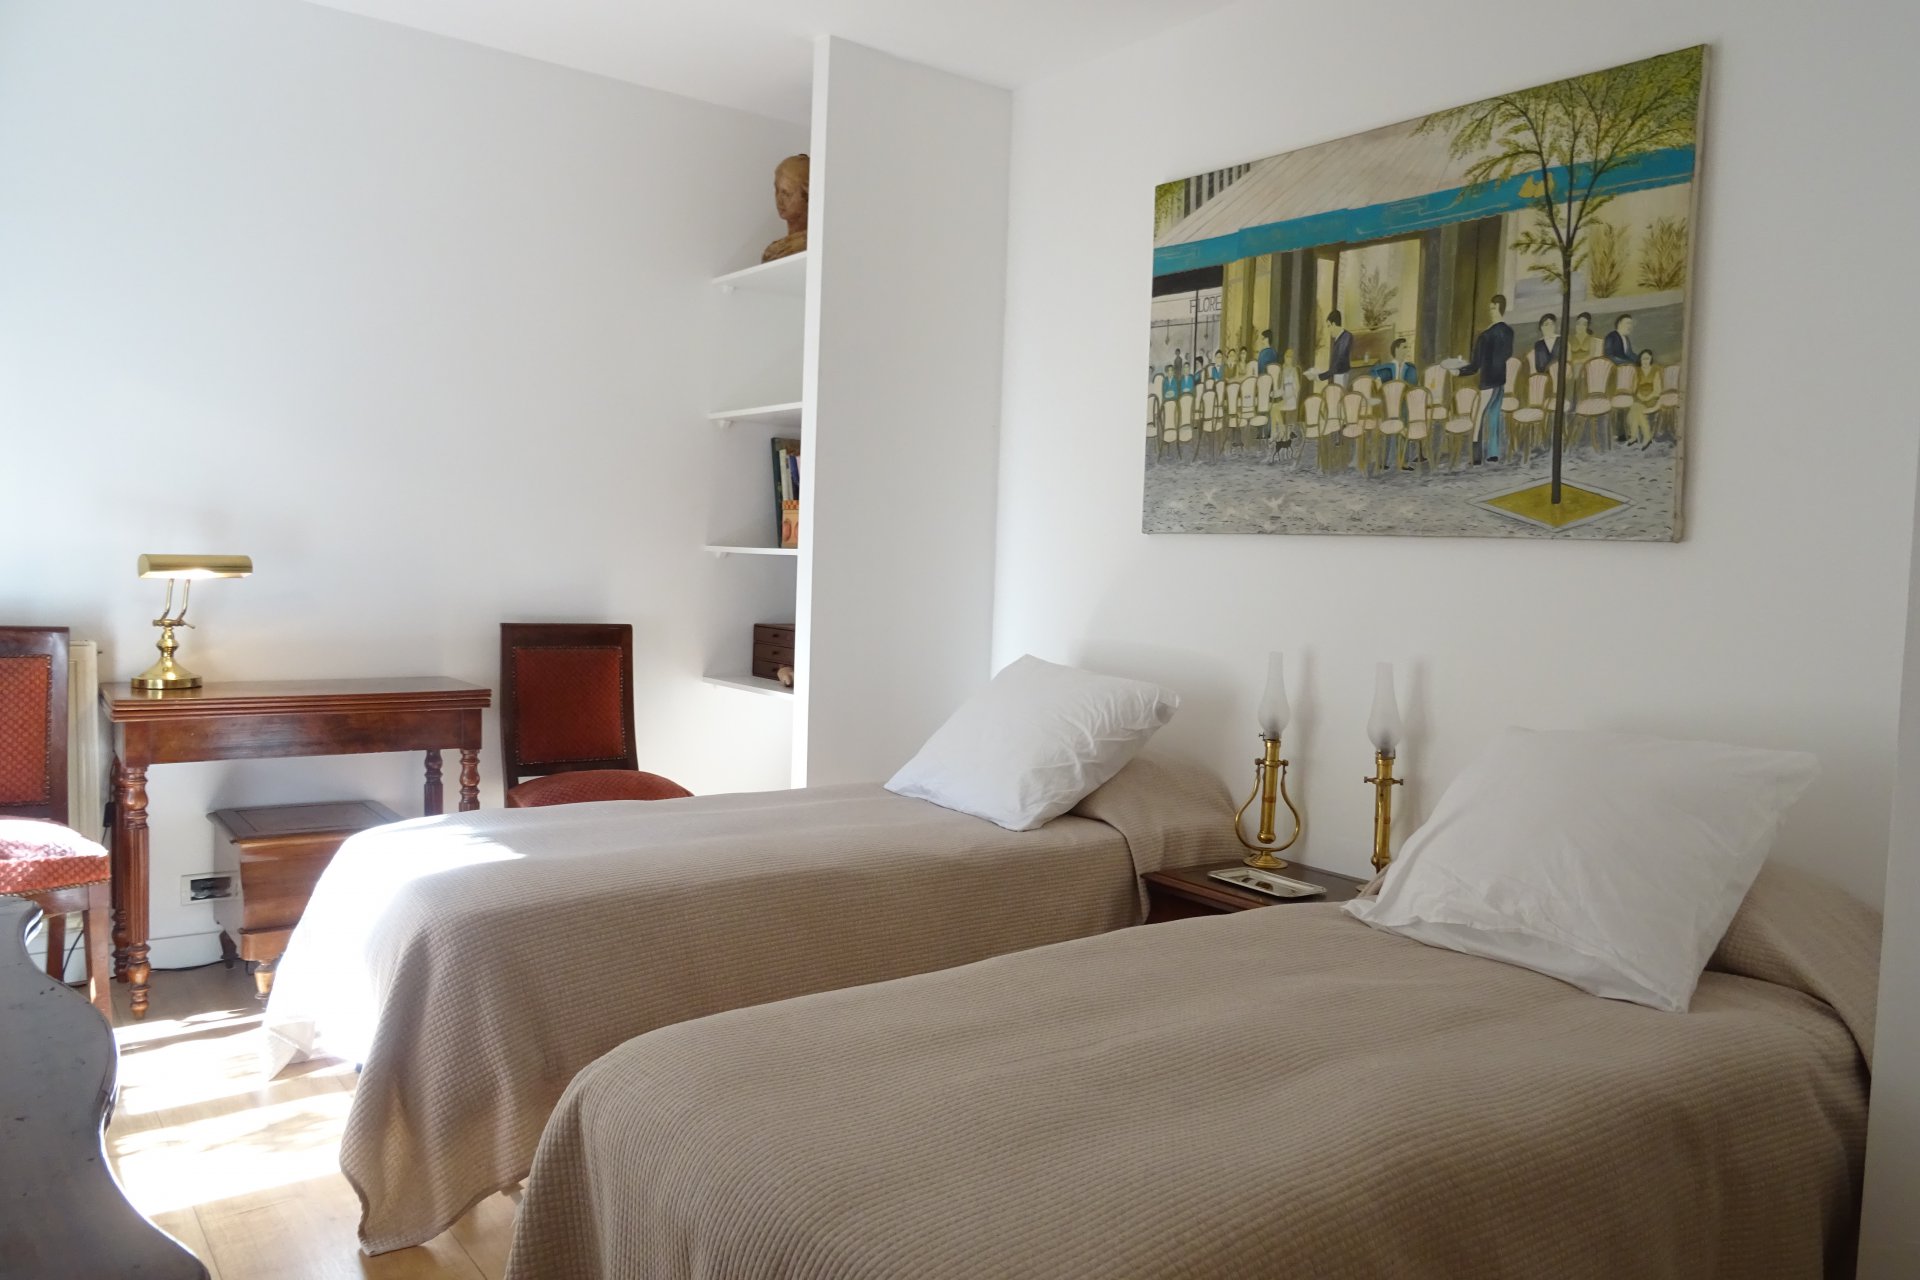 Simple Aix Apartments For Rent with Simple Decor